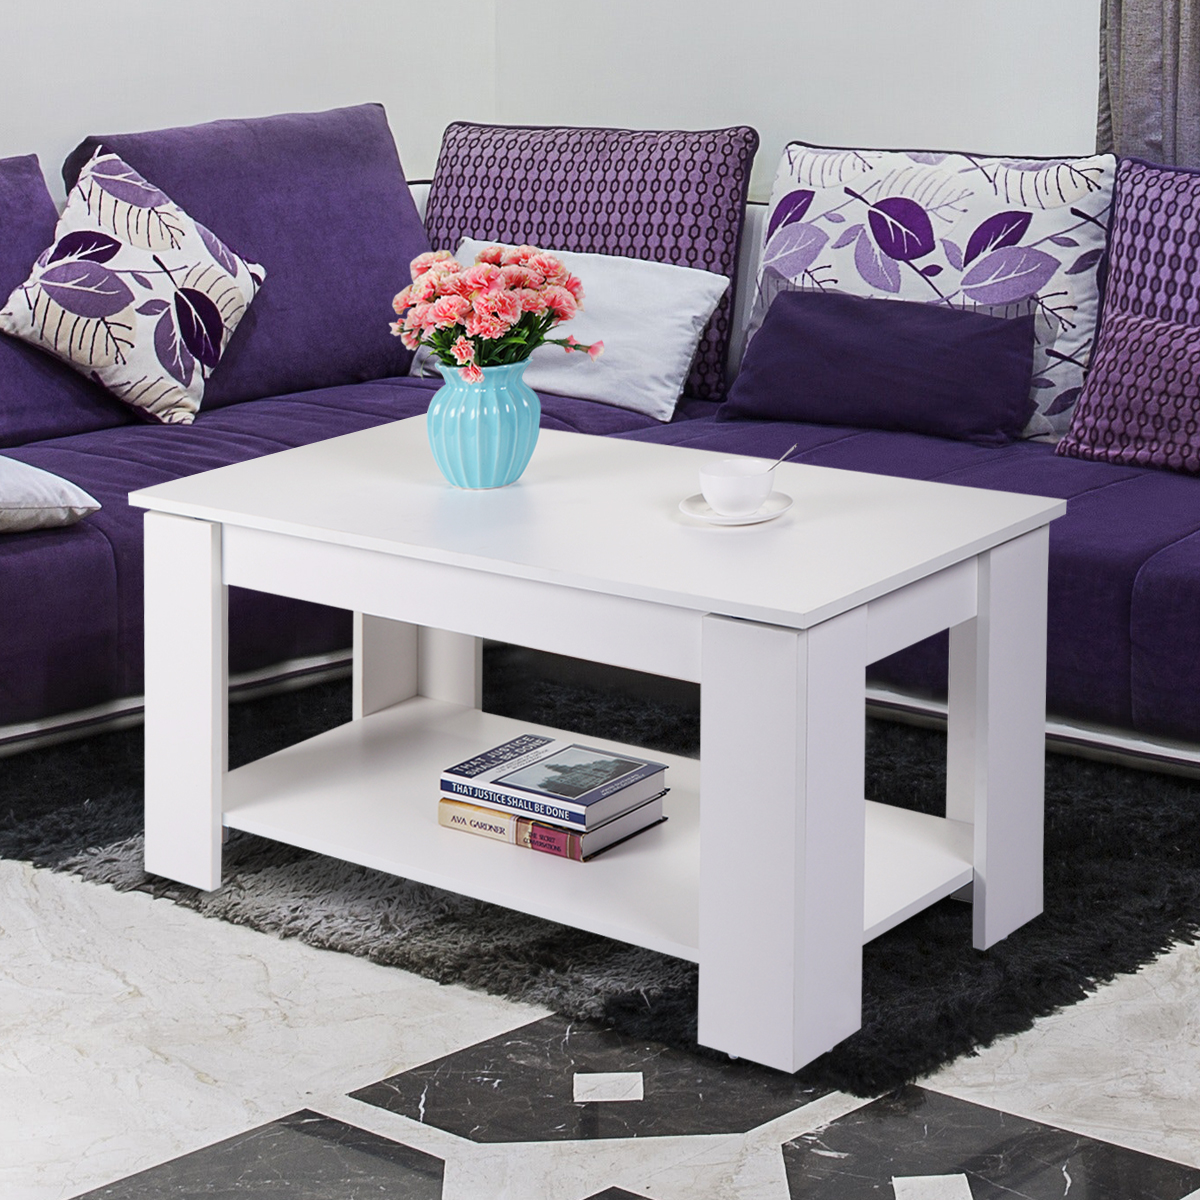 Lift Top Coffee Table with Hidden Compartment and Open Shelf, Modern Wooden Table for Home Living Room, White-CASAINC